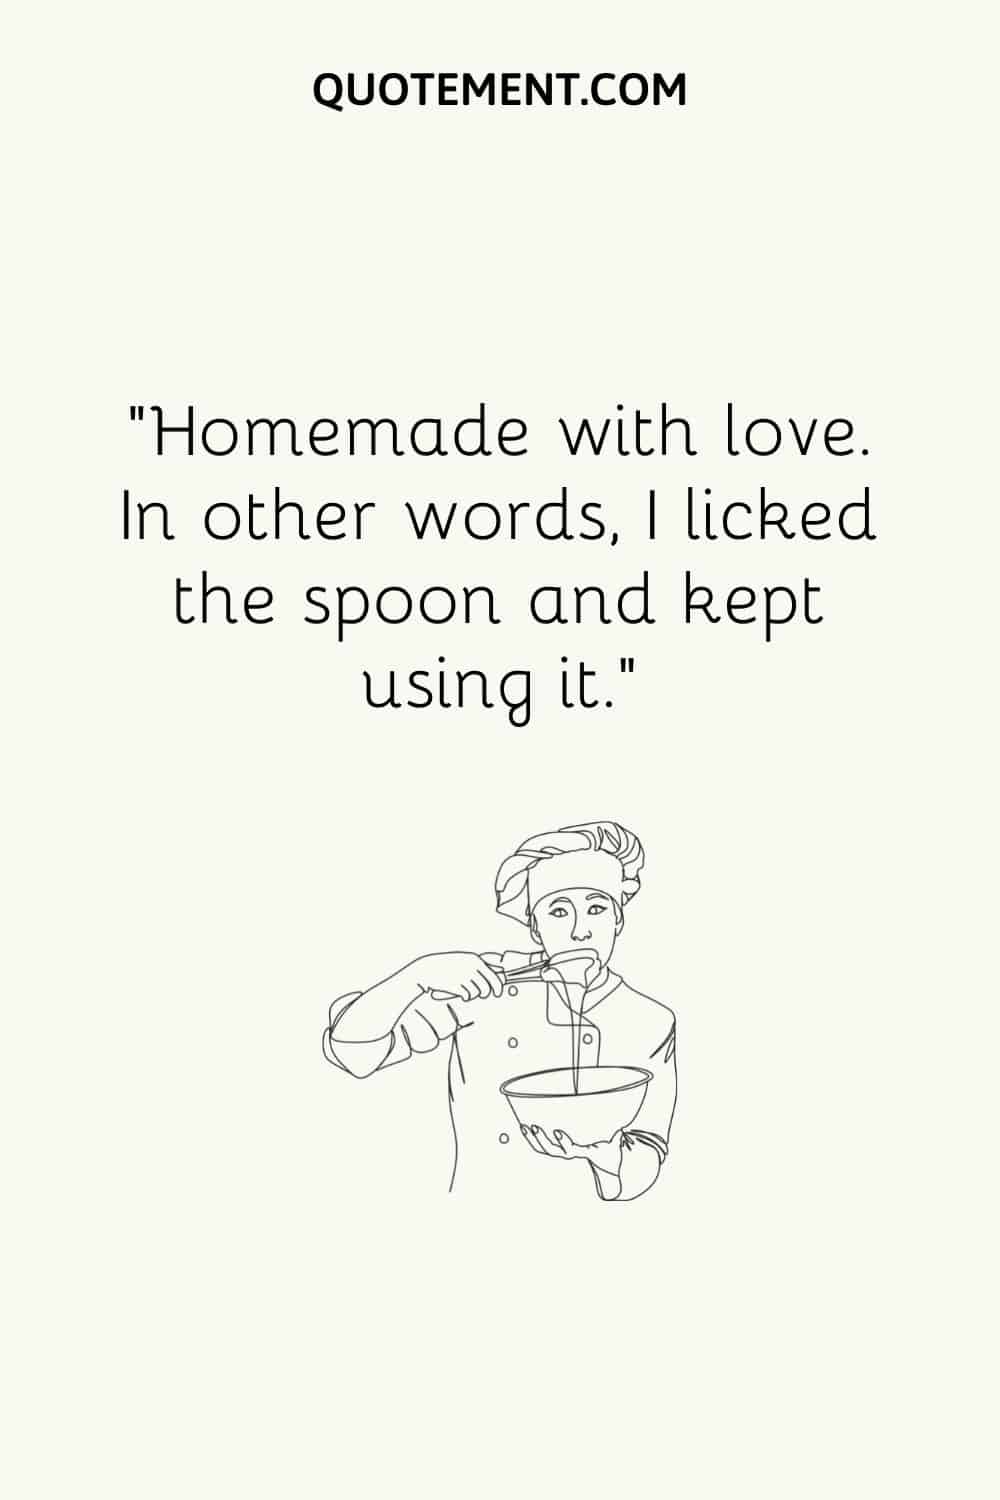 Homemade with love. In other words, I licked the spoon and kept using it